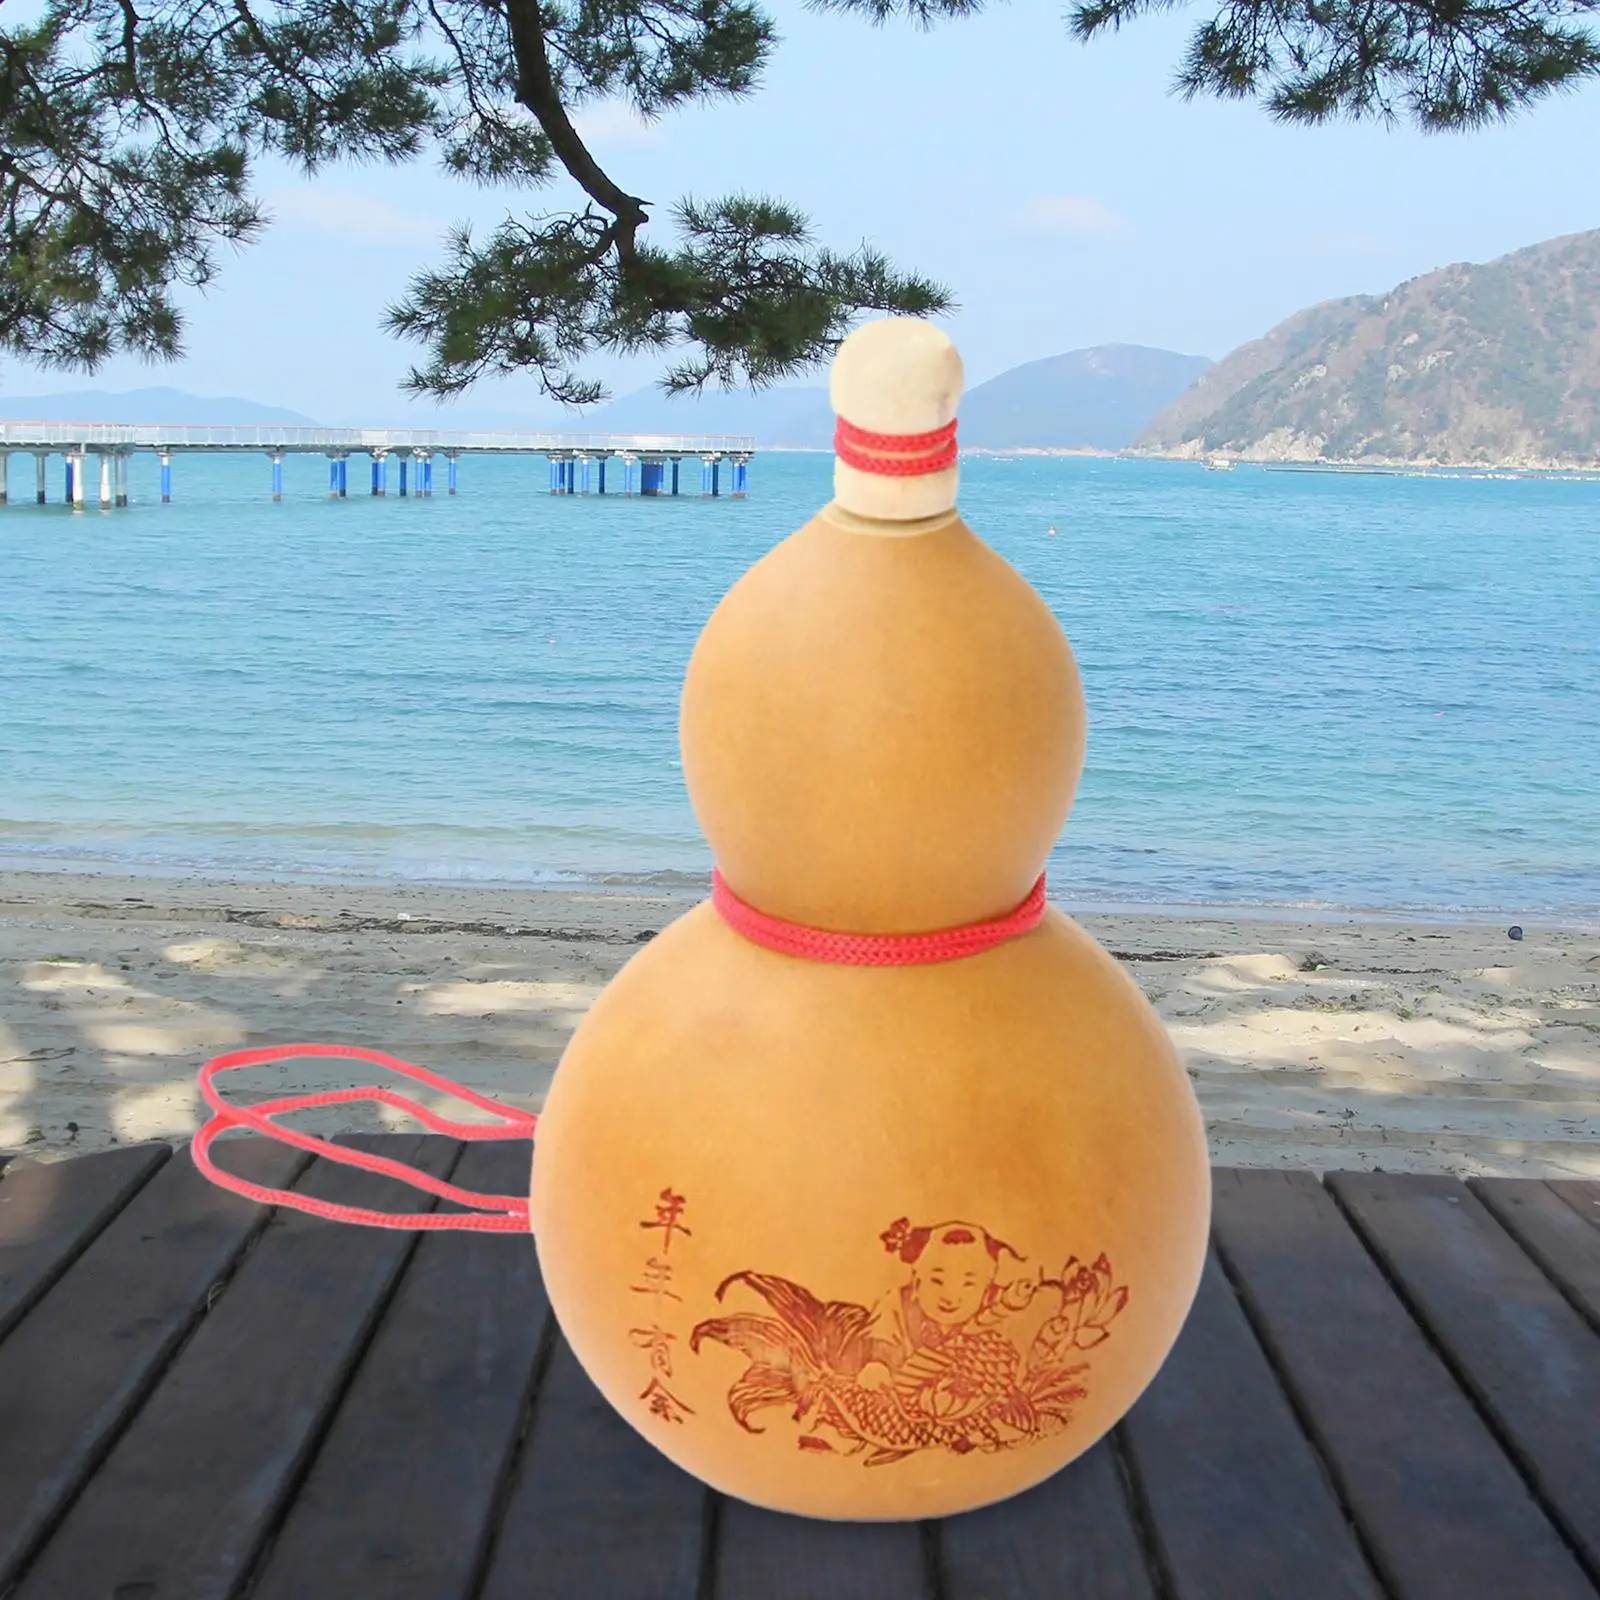 Flagon Outdoor Activities Desktop Decor Hanging Portable Water Bottle Gourd for Yard Living Room Office Housewarming Gifts